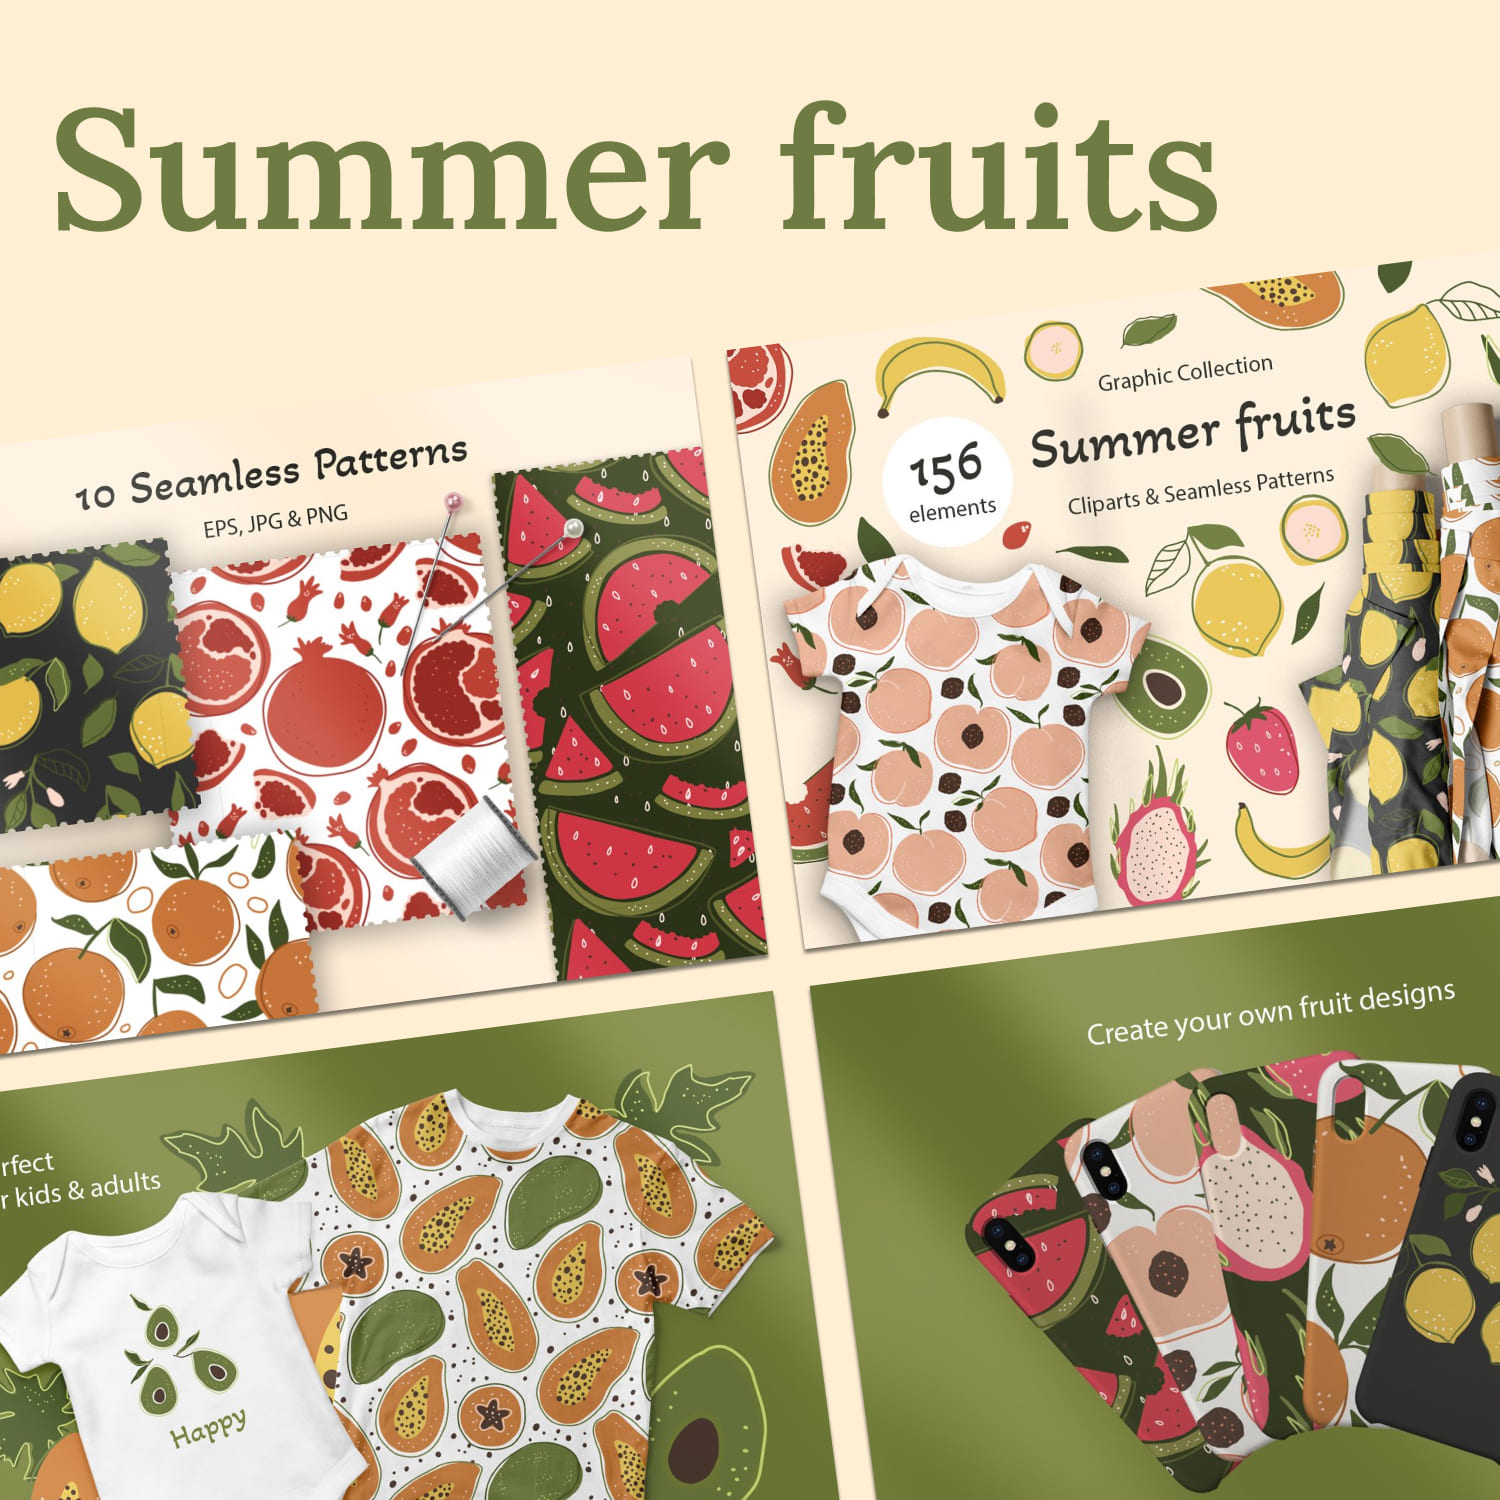 Summer fruits. big graphic set - main image preview.